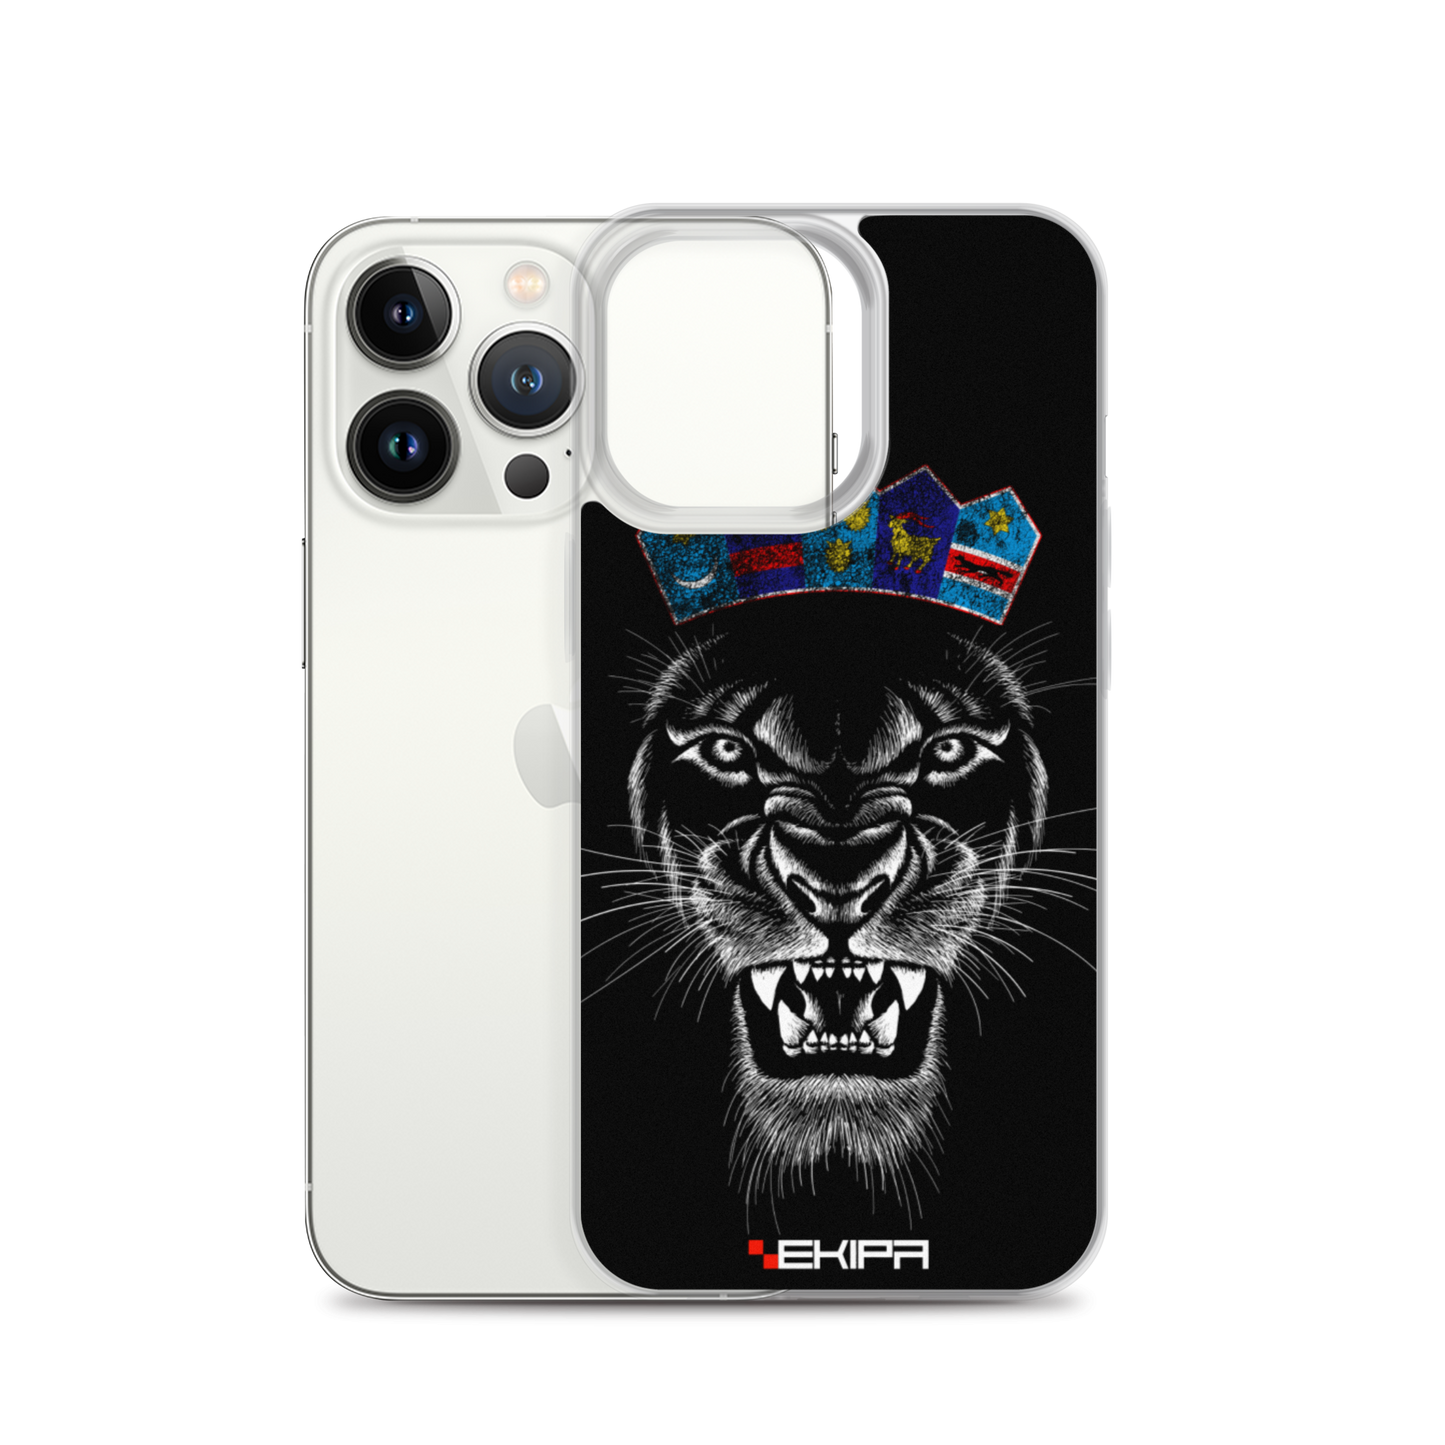 "Lion King" - iPhone case